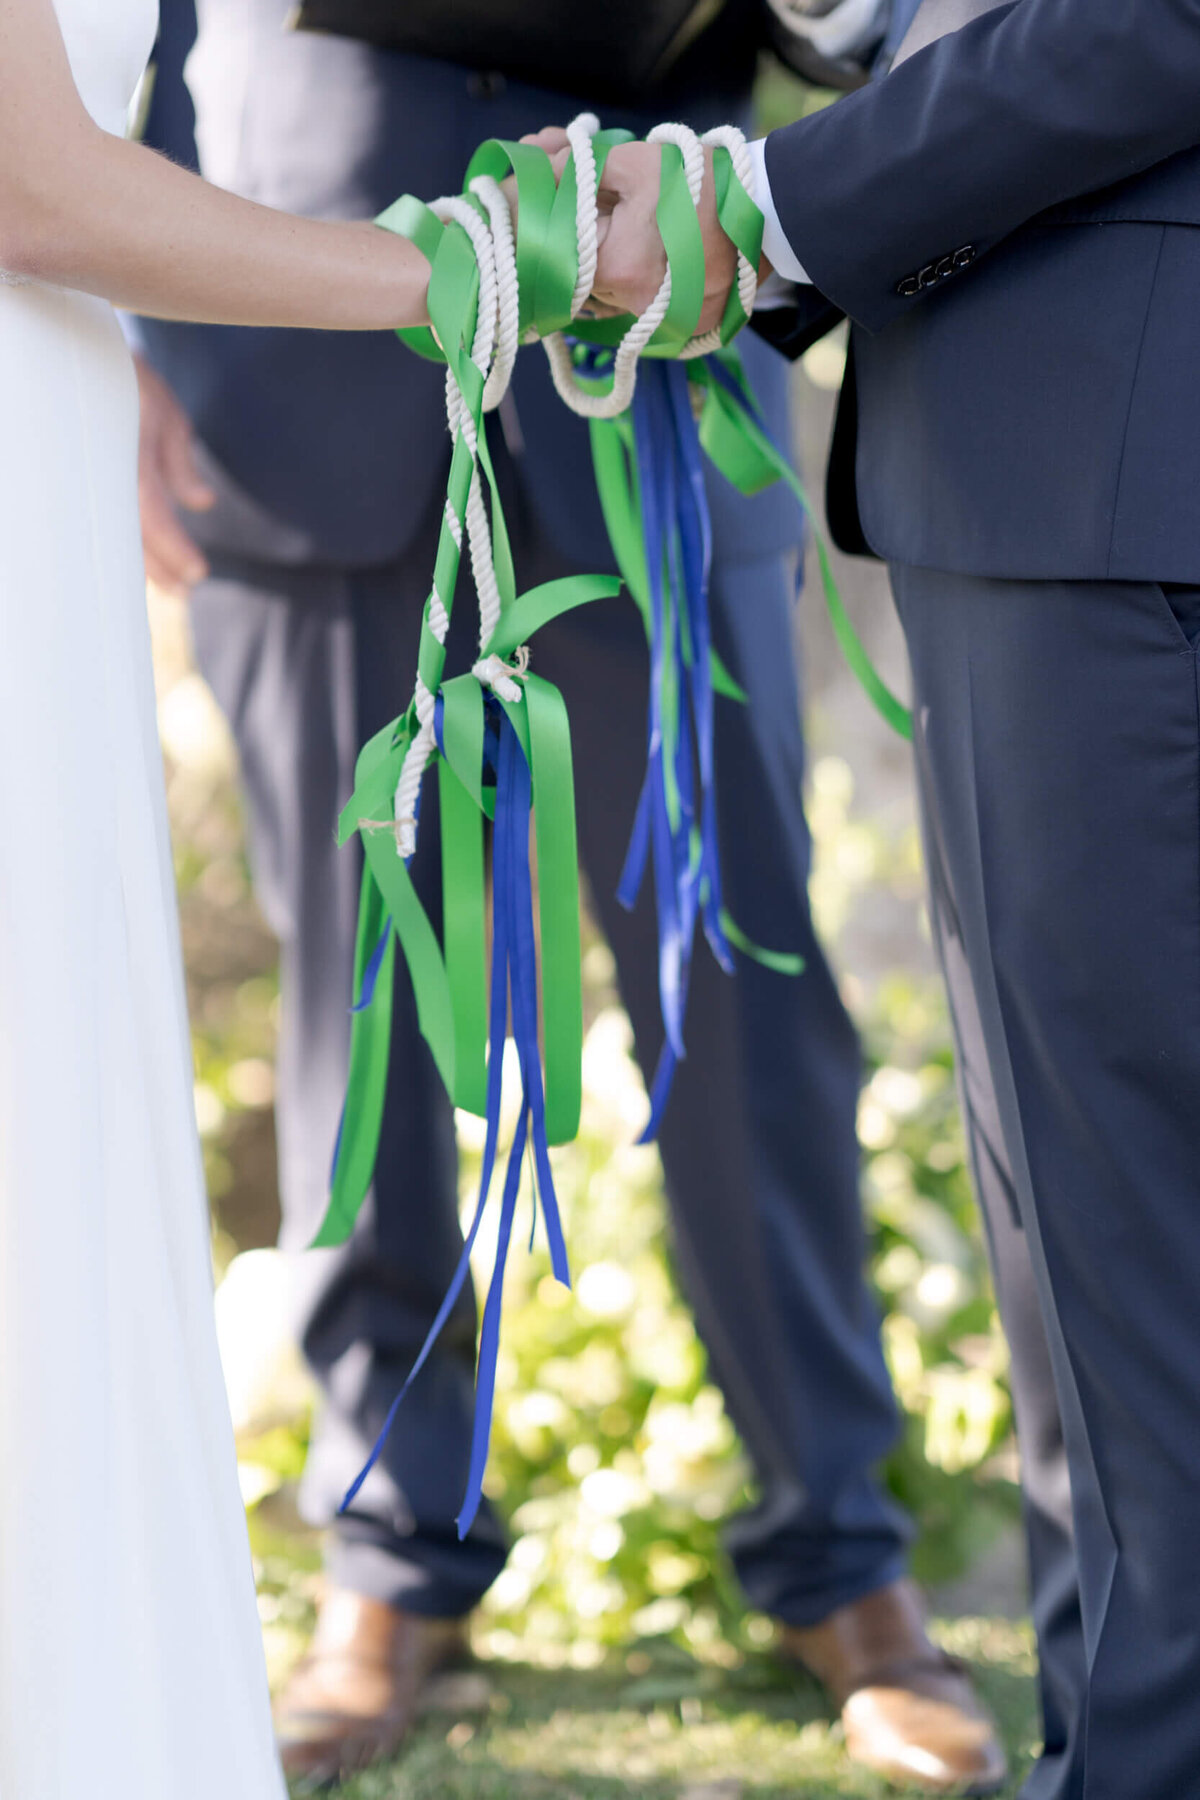 Hands of the marrying couple tied together with ribbons and ropes, symbolizing their unification.